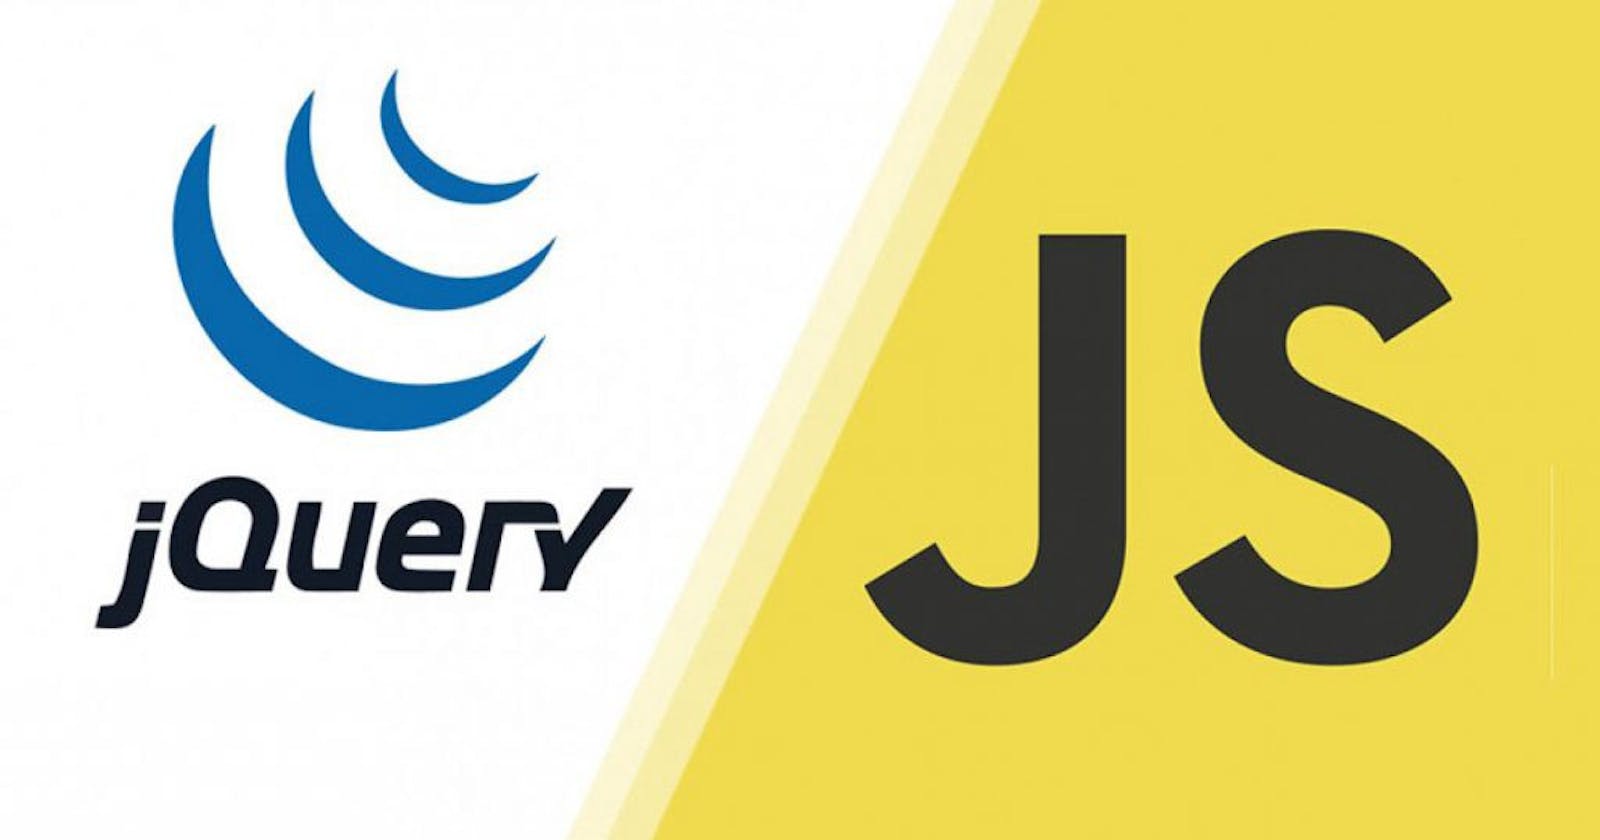 jQuery: A Historical Overview of the Library That Changed Web Development